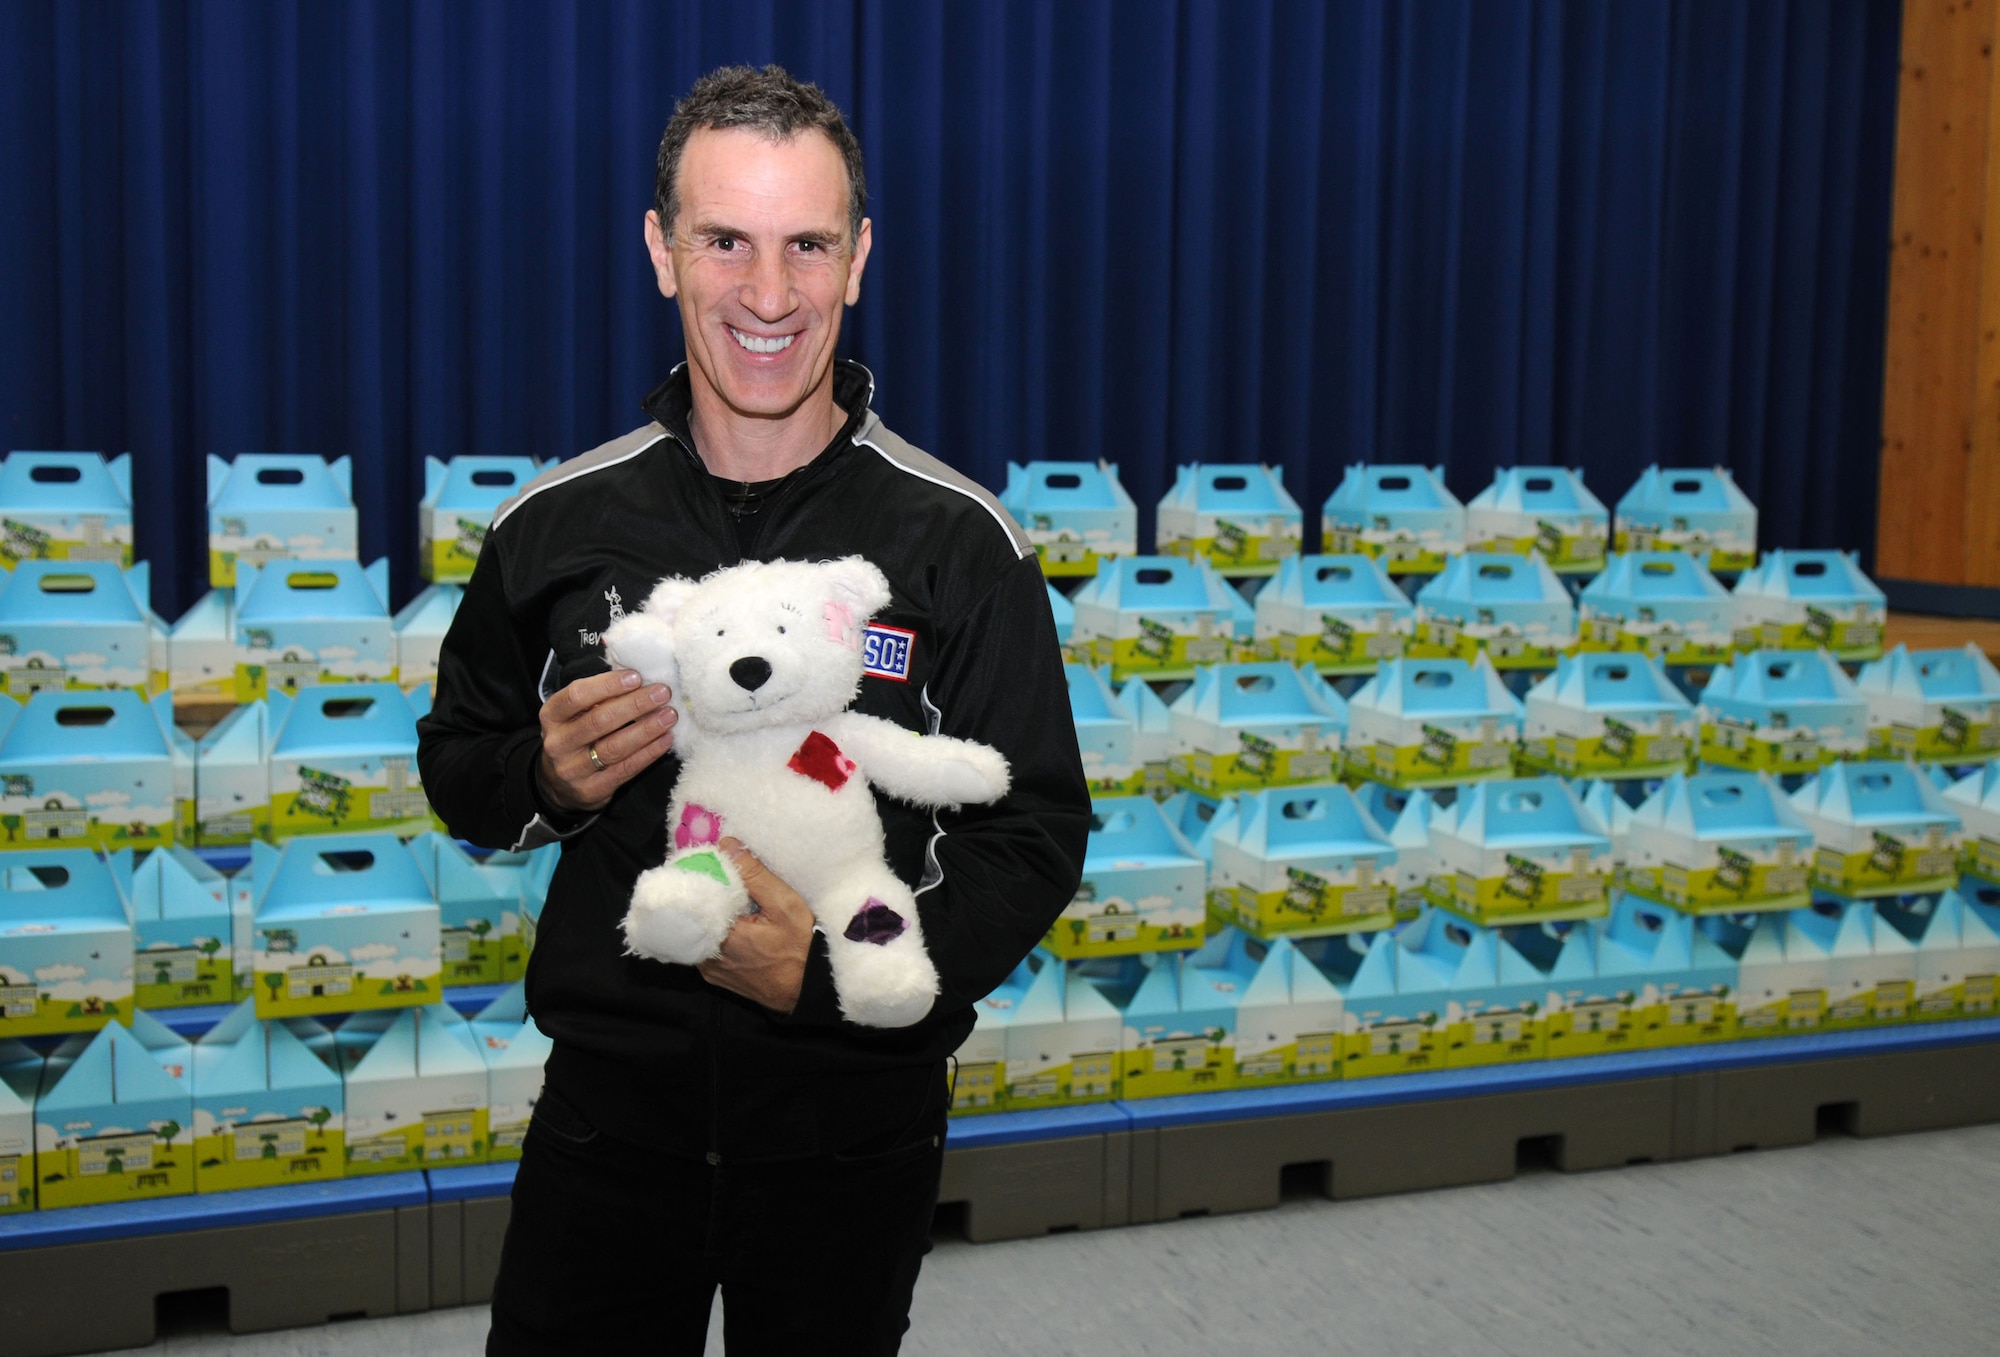 Mr. Trevor Romain, children's author, proudly displays his new character Cuzzie the Bear in front of Cuzzie Cares Deployment Kits at Ramstein Elementary School, Ramstein Air Base, Germany, Dec. 17, 2009. Cuzzie is an inventive bear that creates flying machines with the help of his ground crew and is the centerpiece of a new kit designed to comfort school-age children while their parents are deployed. (U.S. Air Force photo by Airman 1st Class Brittany Perry)